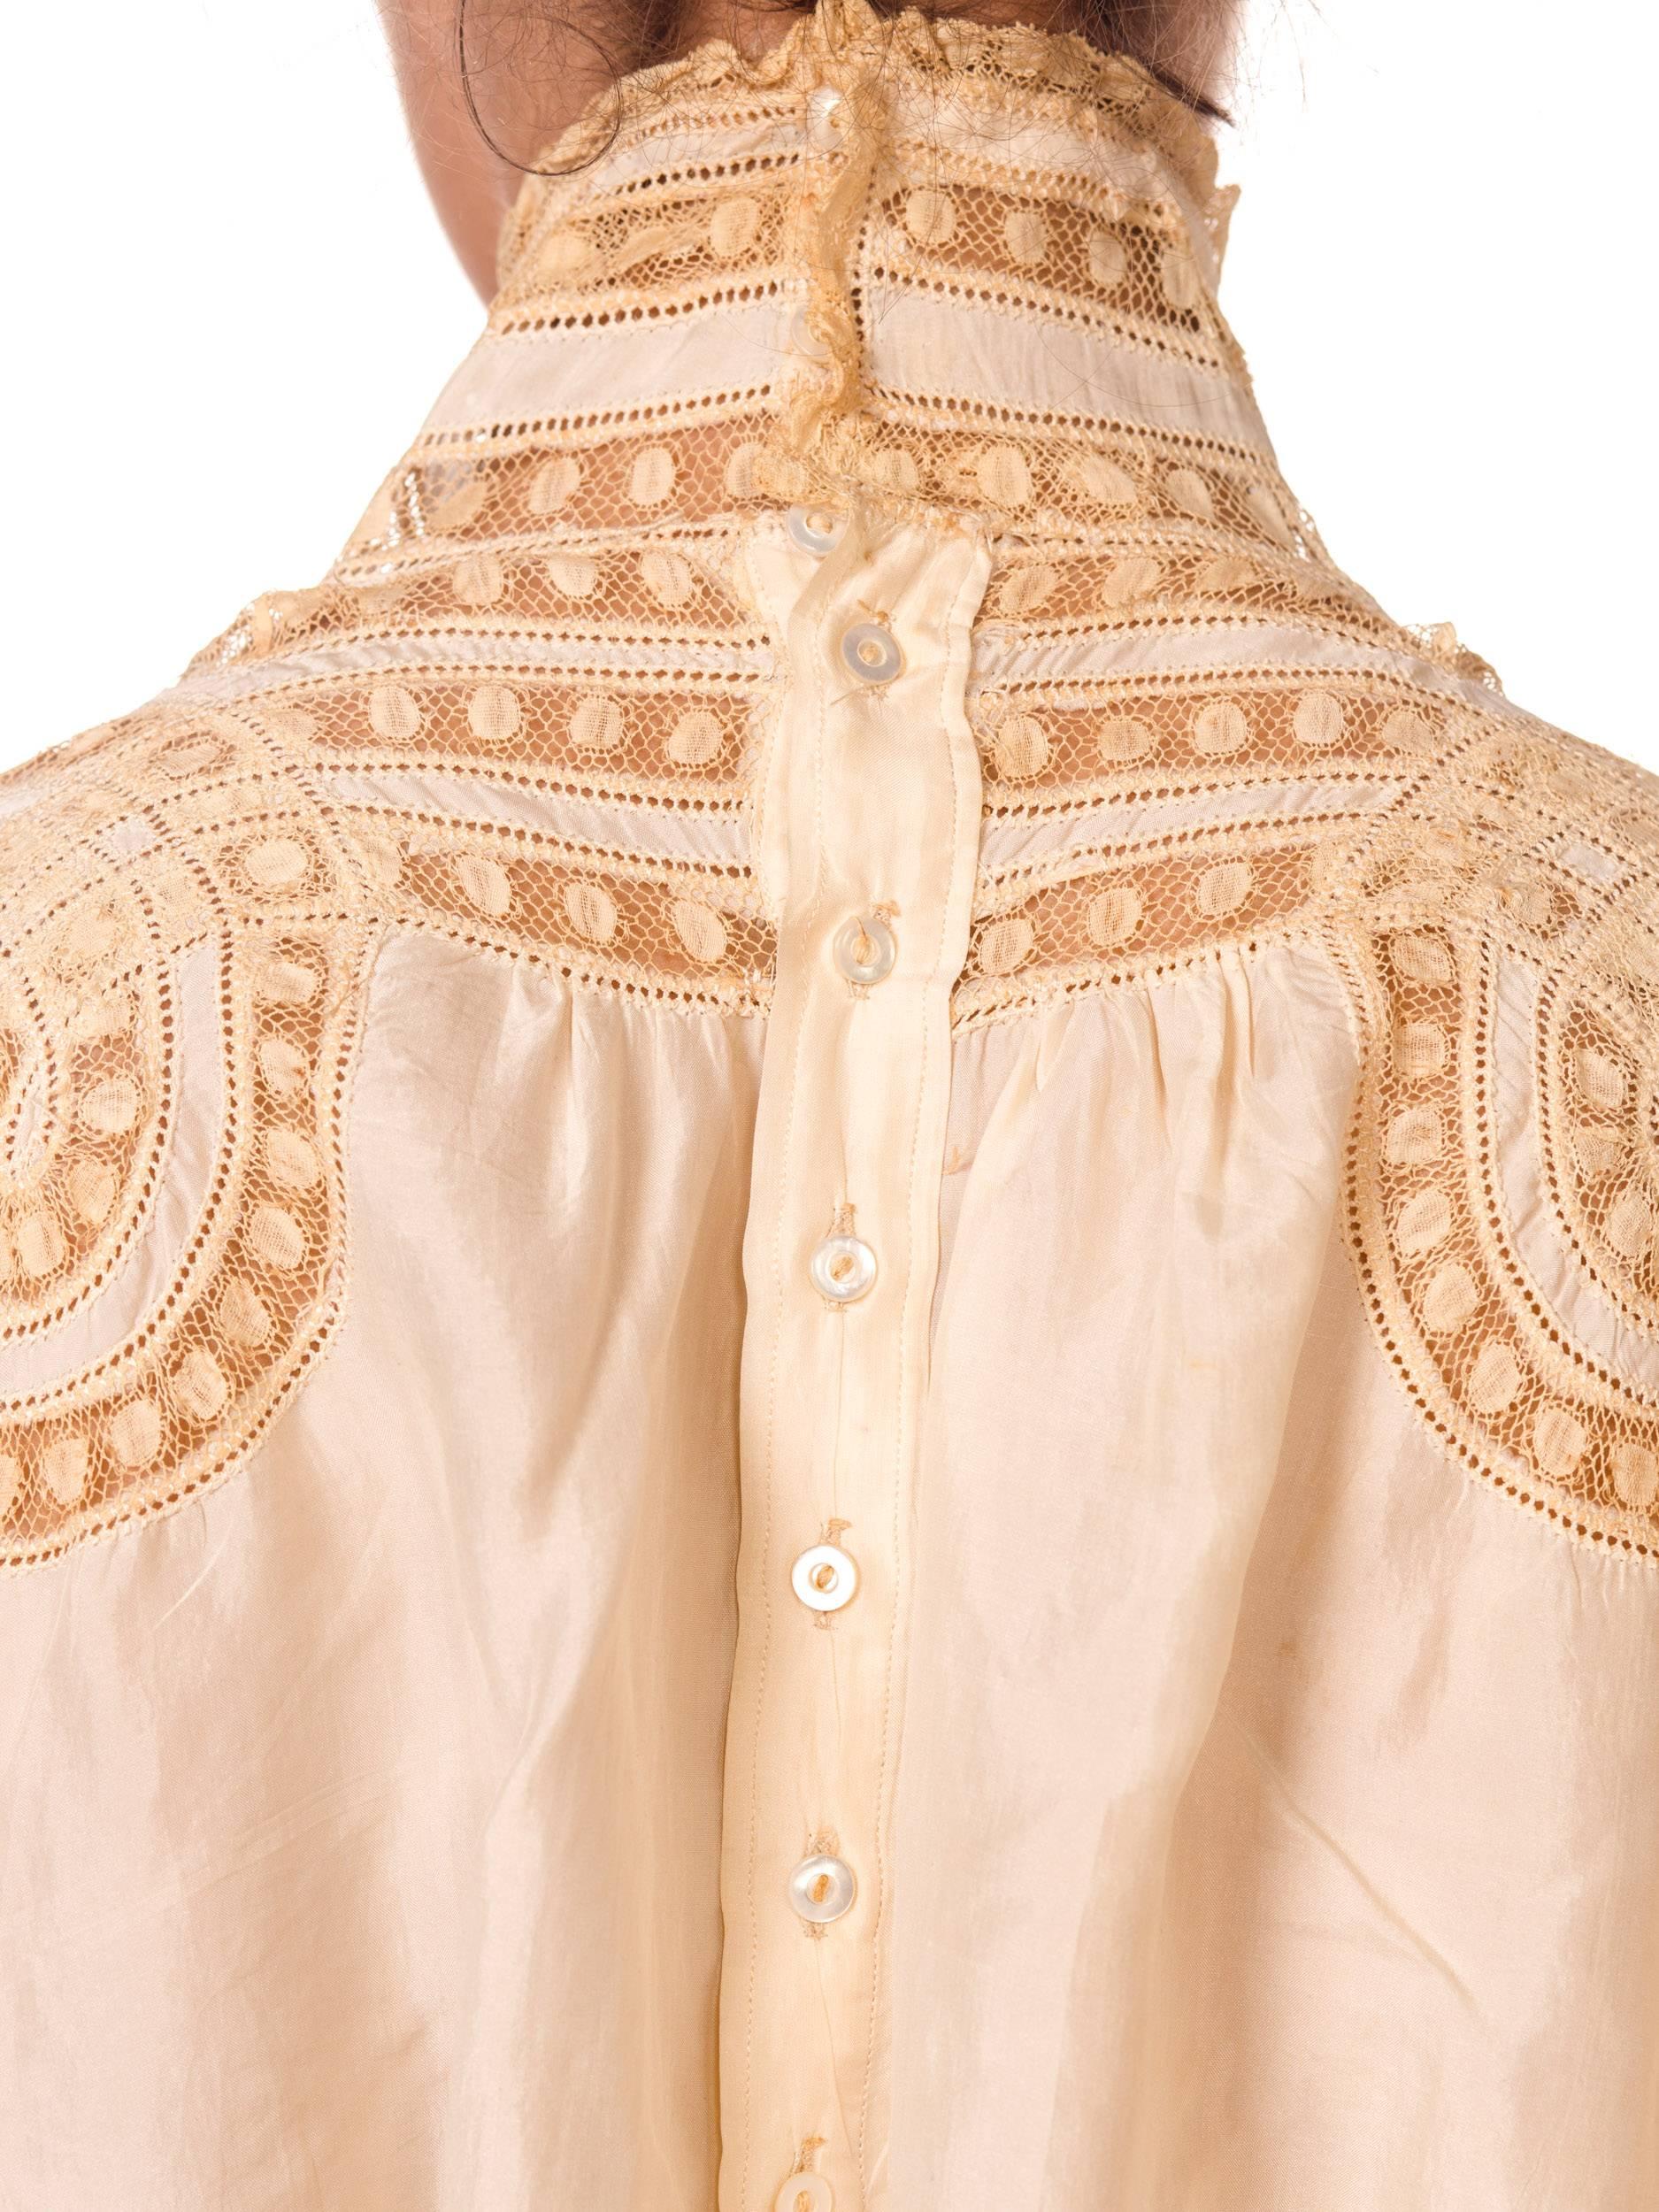 Victorian high neck Silk Top with Swirls Of Lace Inlay Details 6